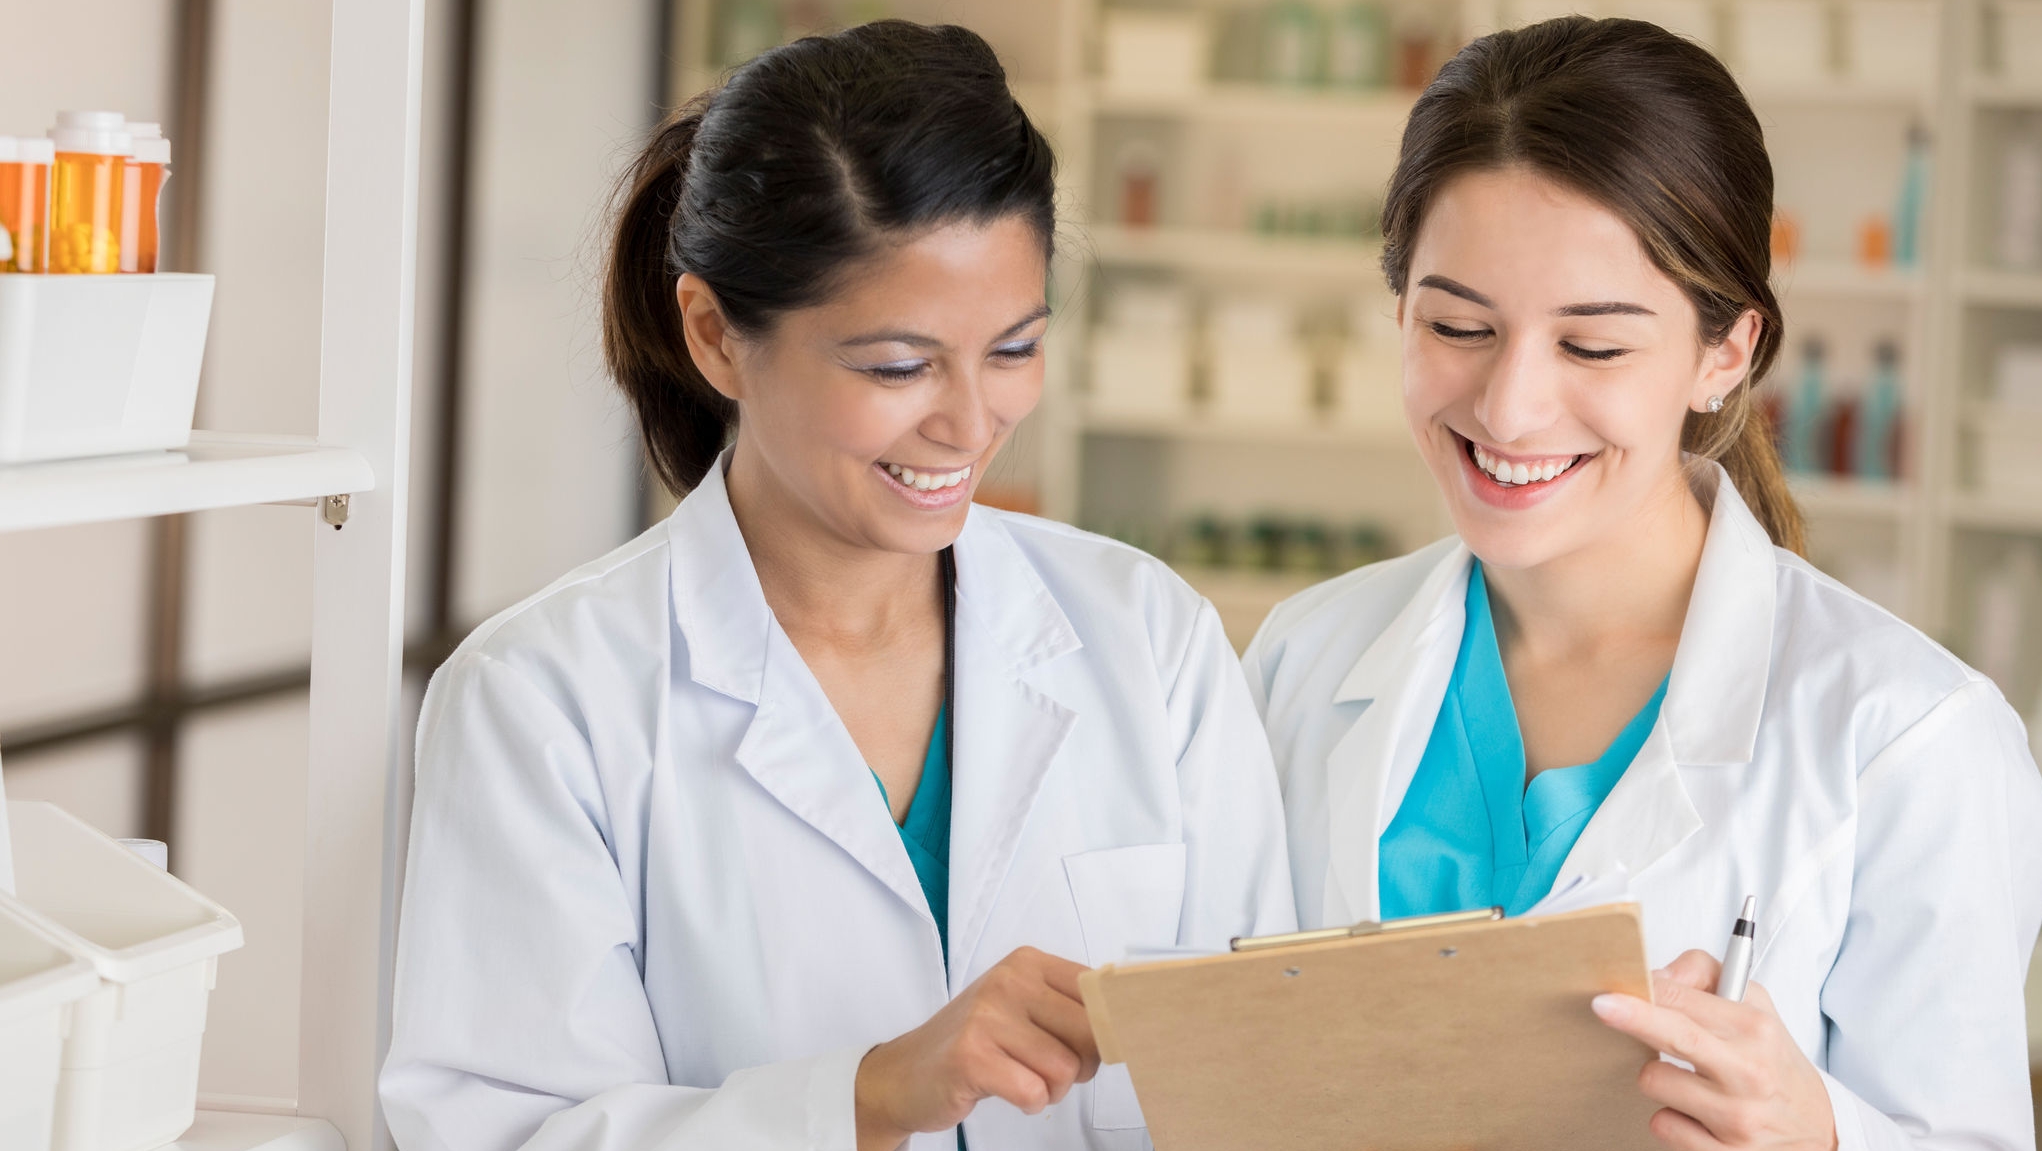 Cheerful diverse female pharmacists check on their pharmacy's inventory. They are reading something on a clipboard.